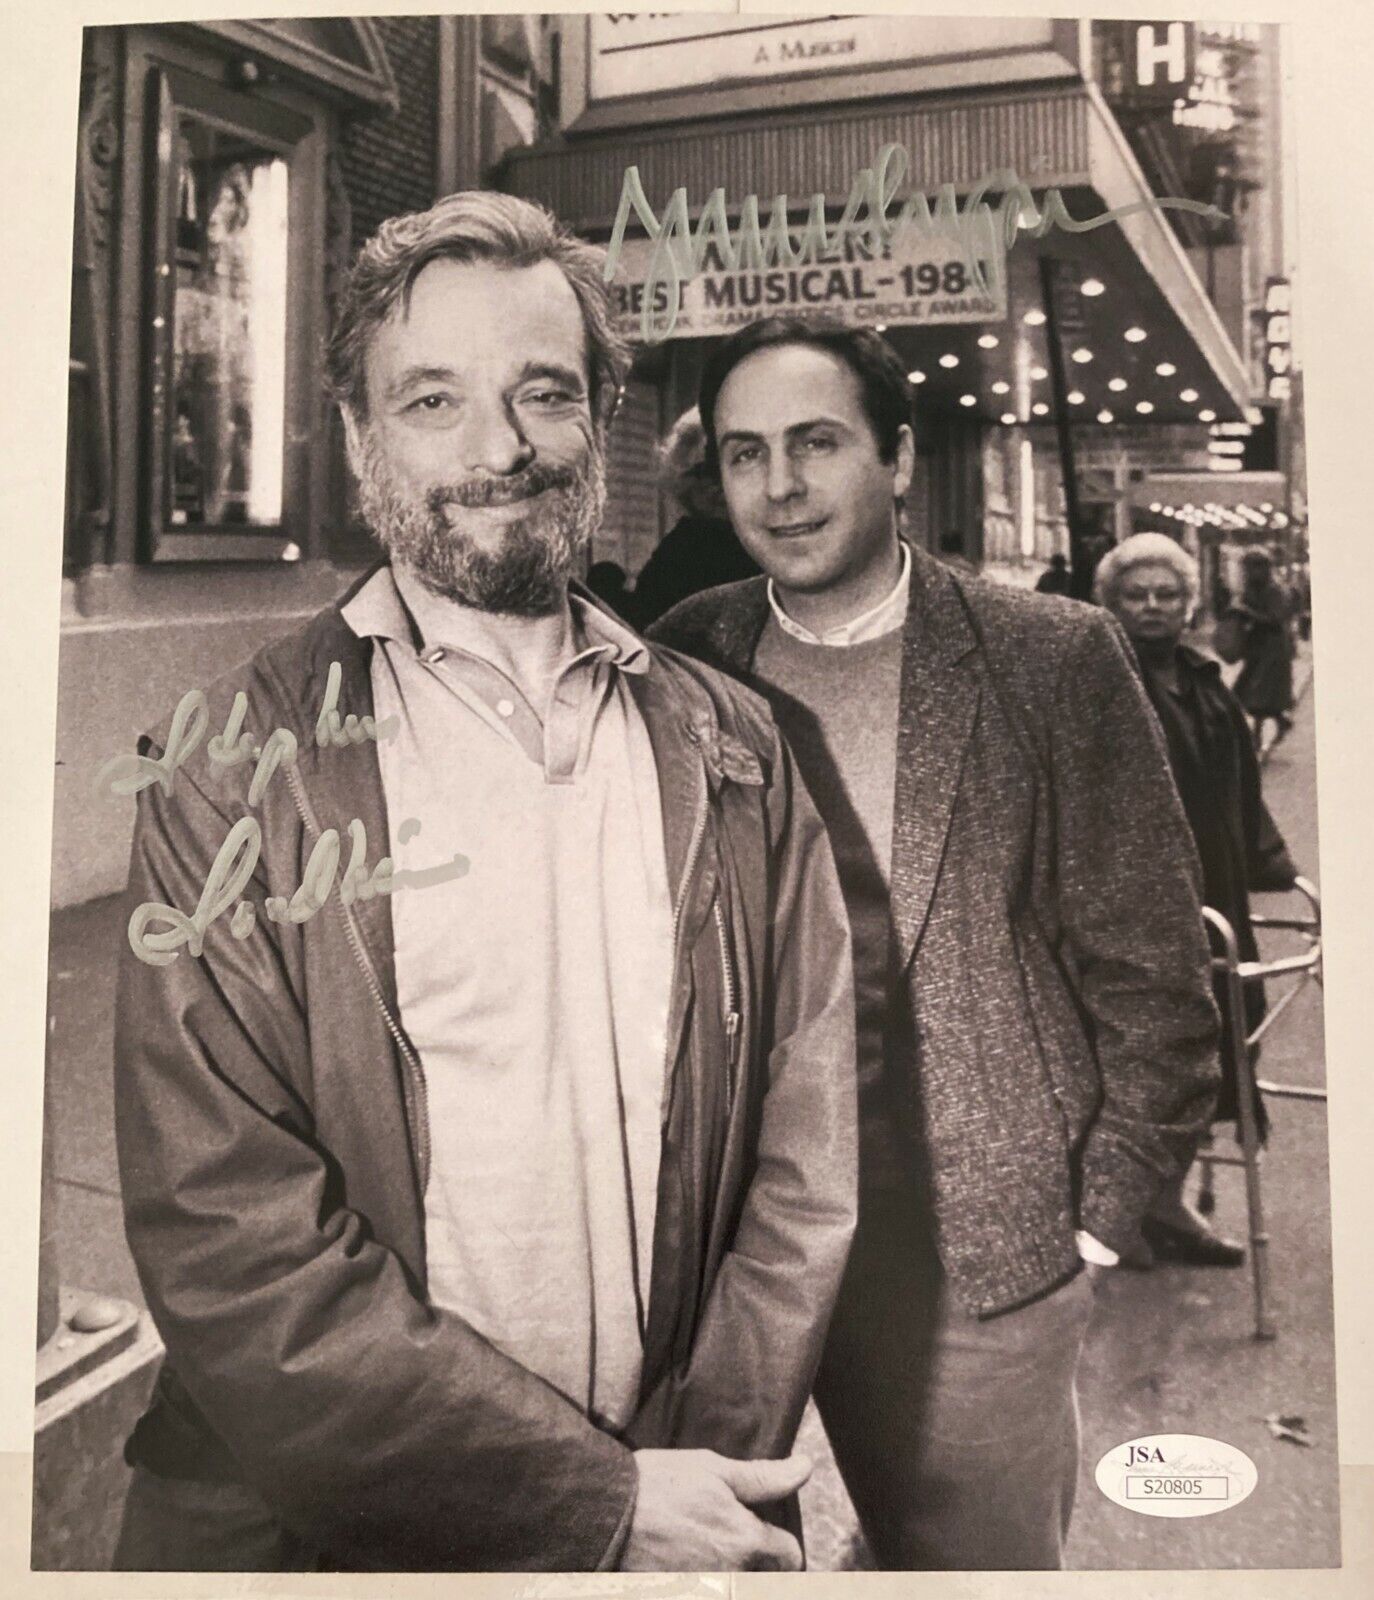 Stephen Sondheim & James Lapine RARE hand SIGNED duo Photo Poster painting JSA COA #2 Composers